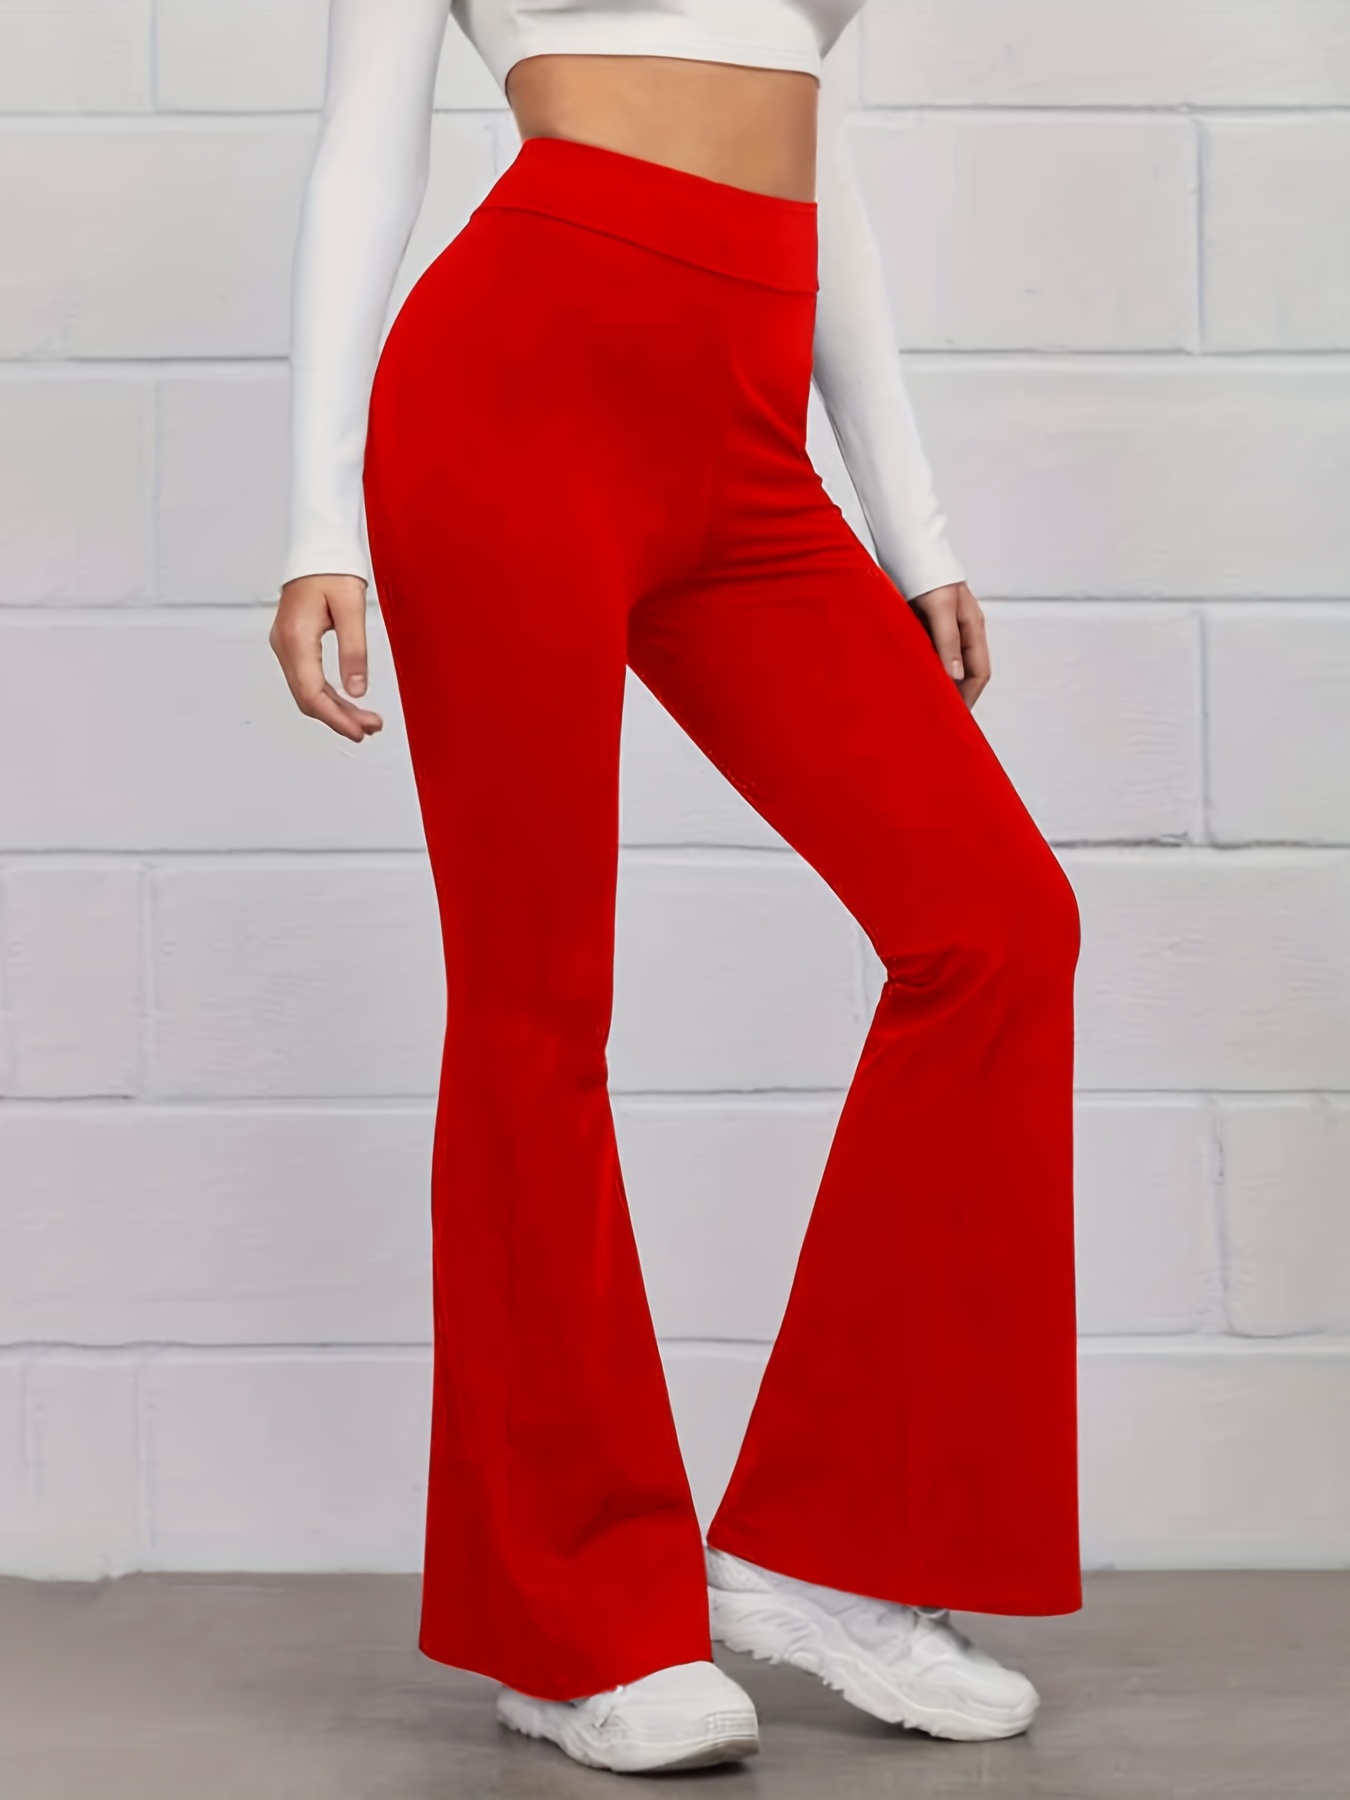 $80 INC International Concepts Womens Red Slim-Fit Flared High-Low Pants  Size 16